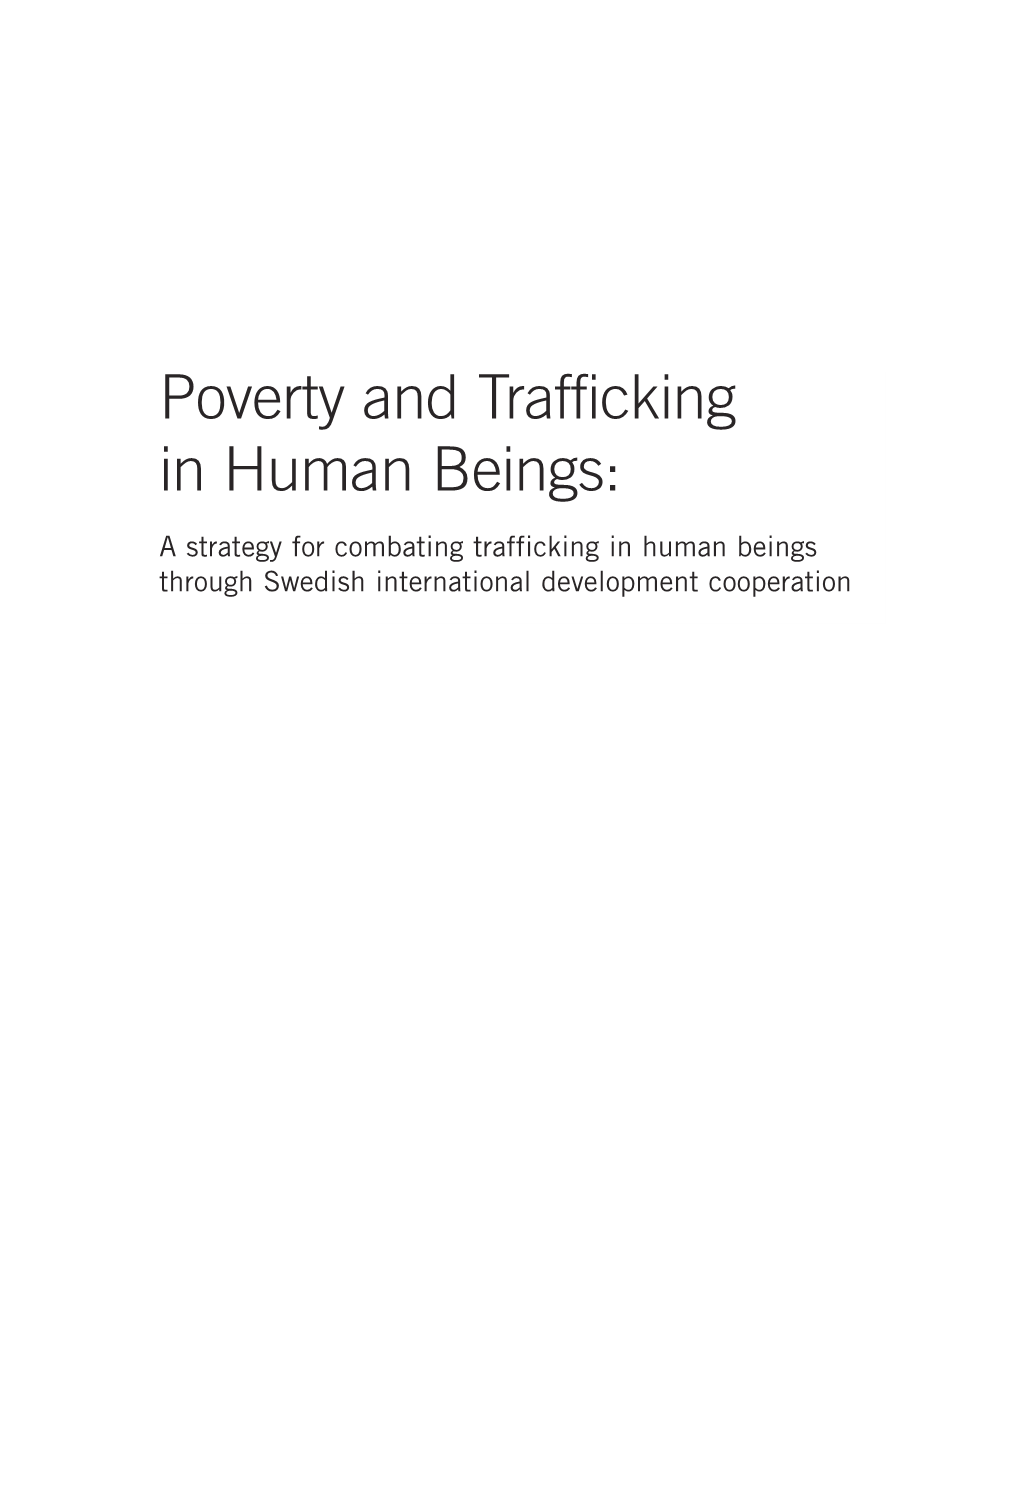 Poverty and Trafficking in Human Beings